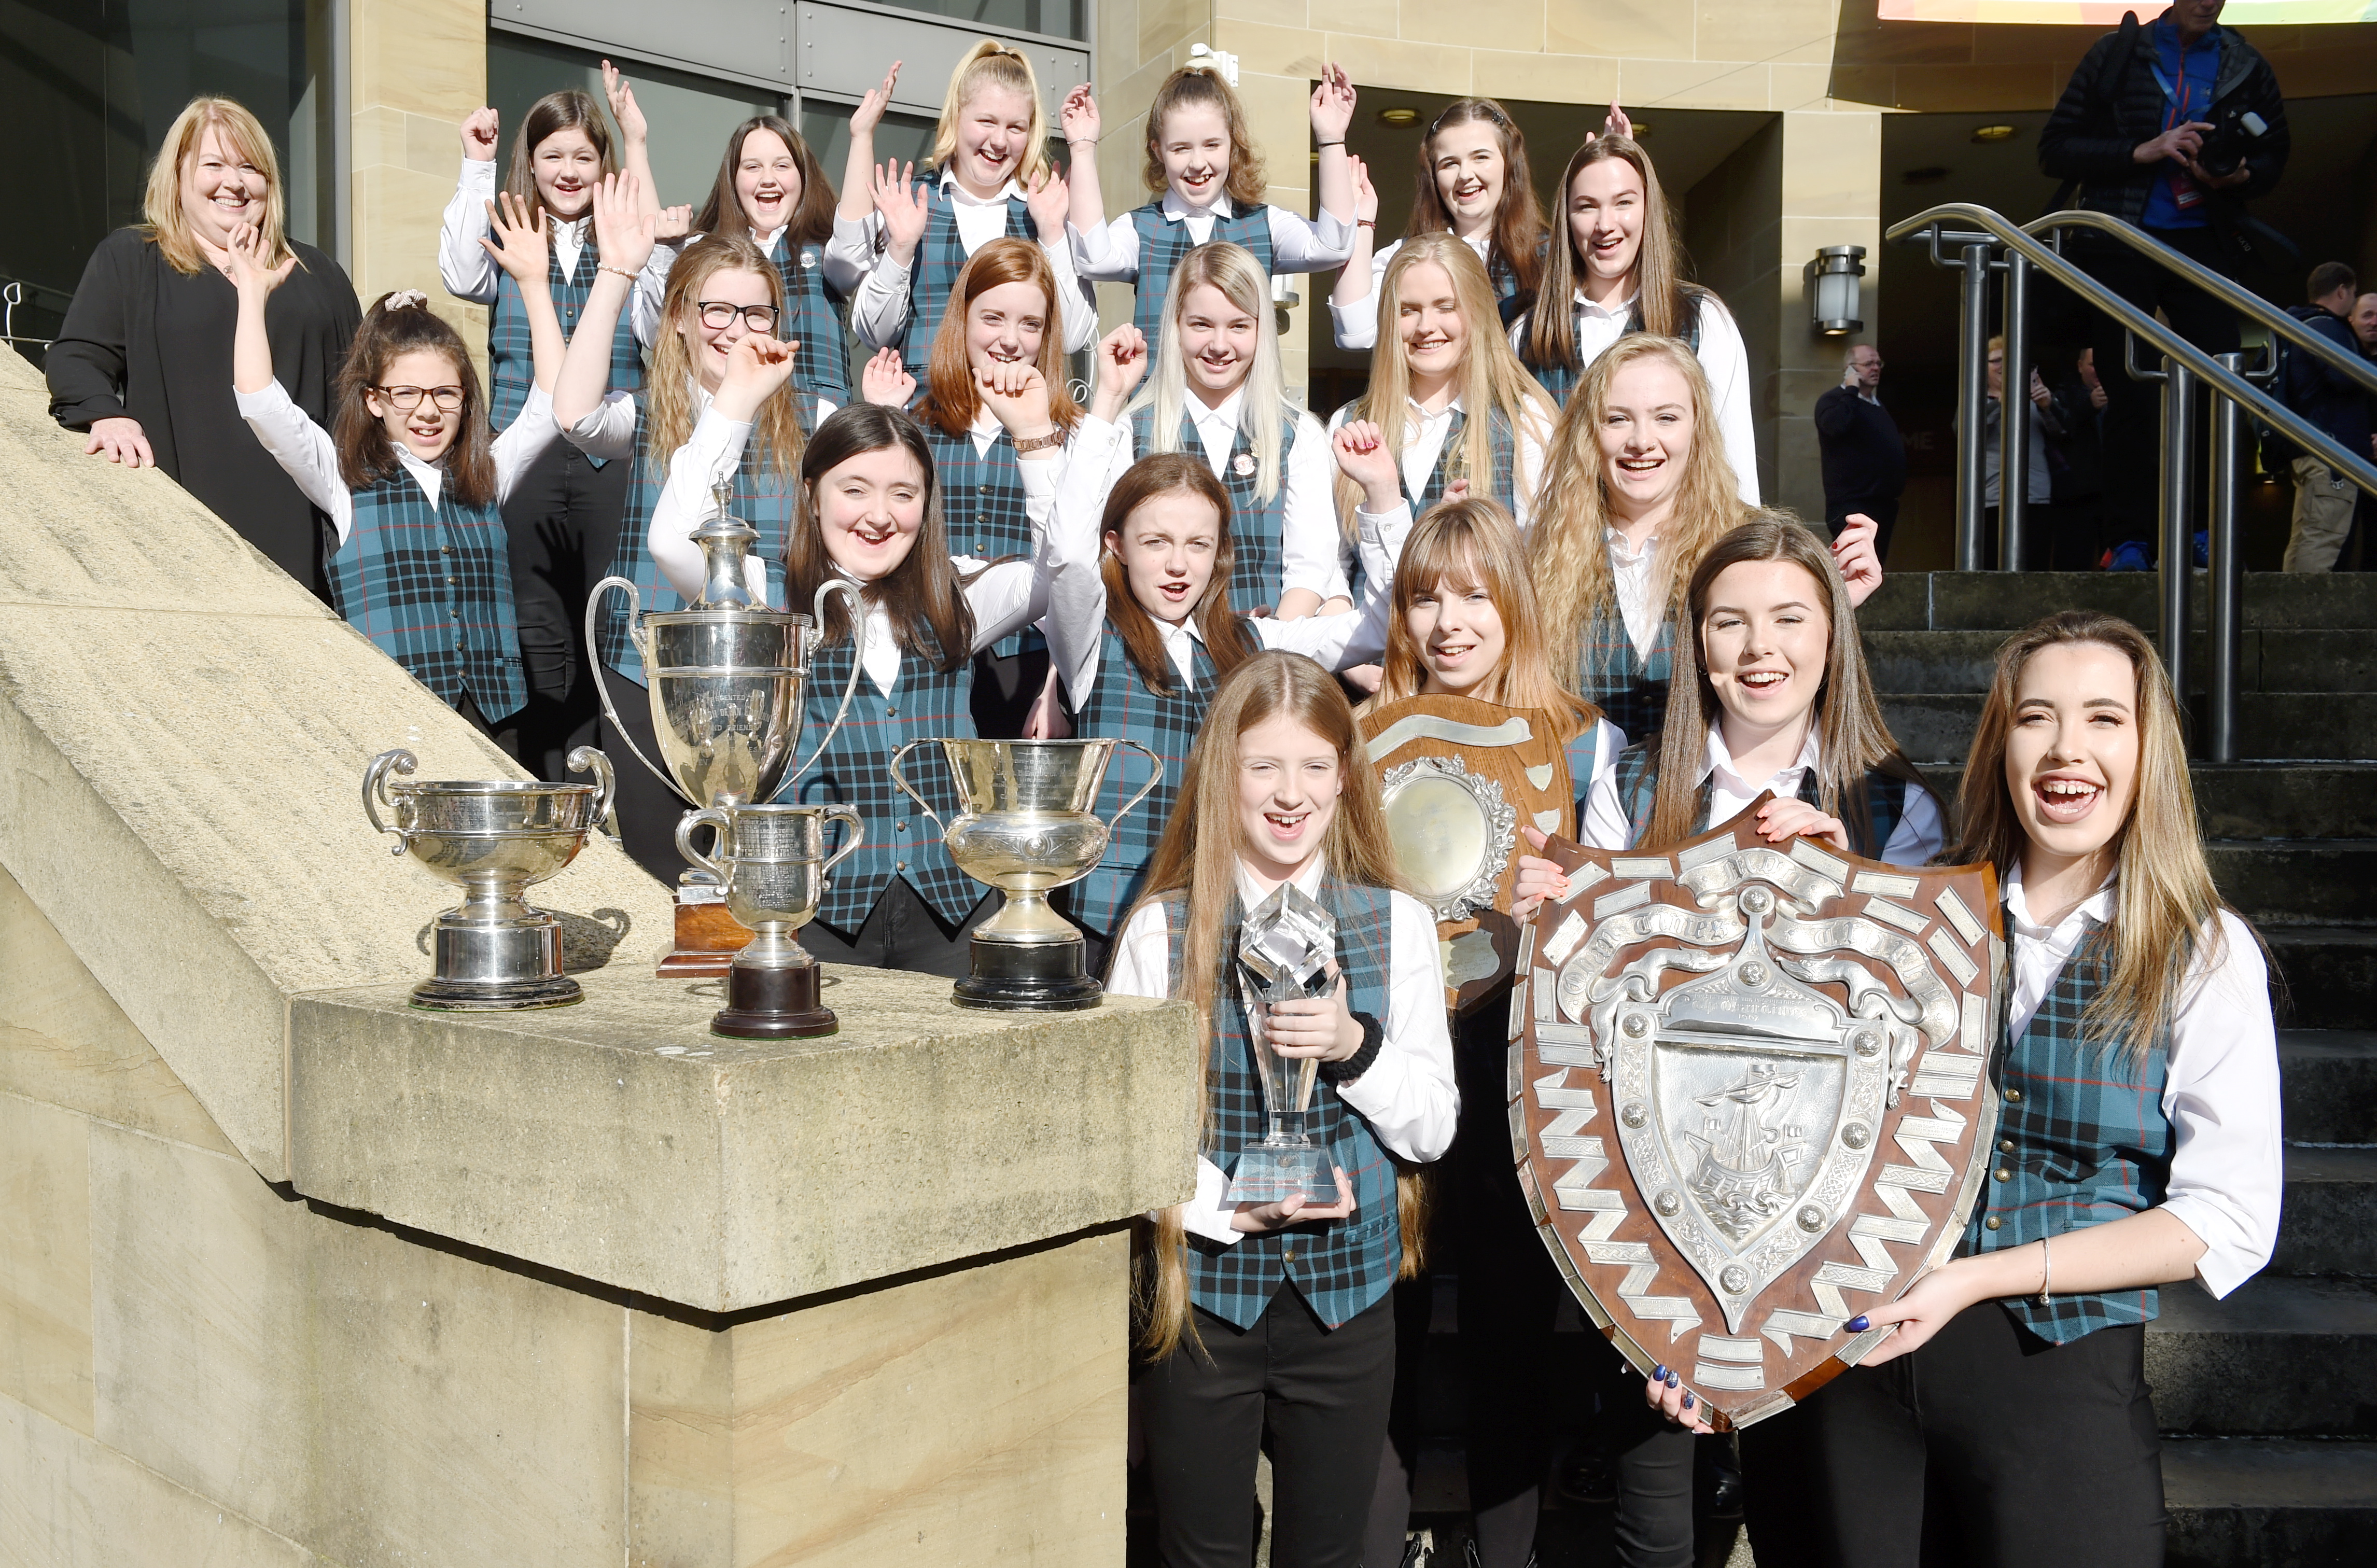 The Nicholson Institute, Stornoway choir with their haul of silverware from the choral competitions yesterday morning.
Picture by Sandy McCook